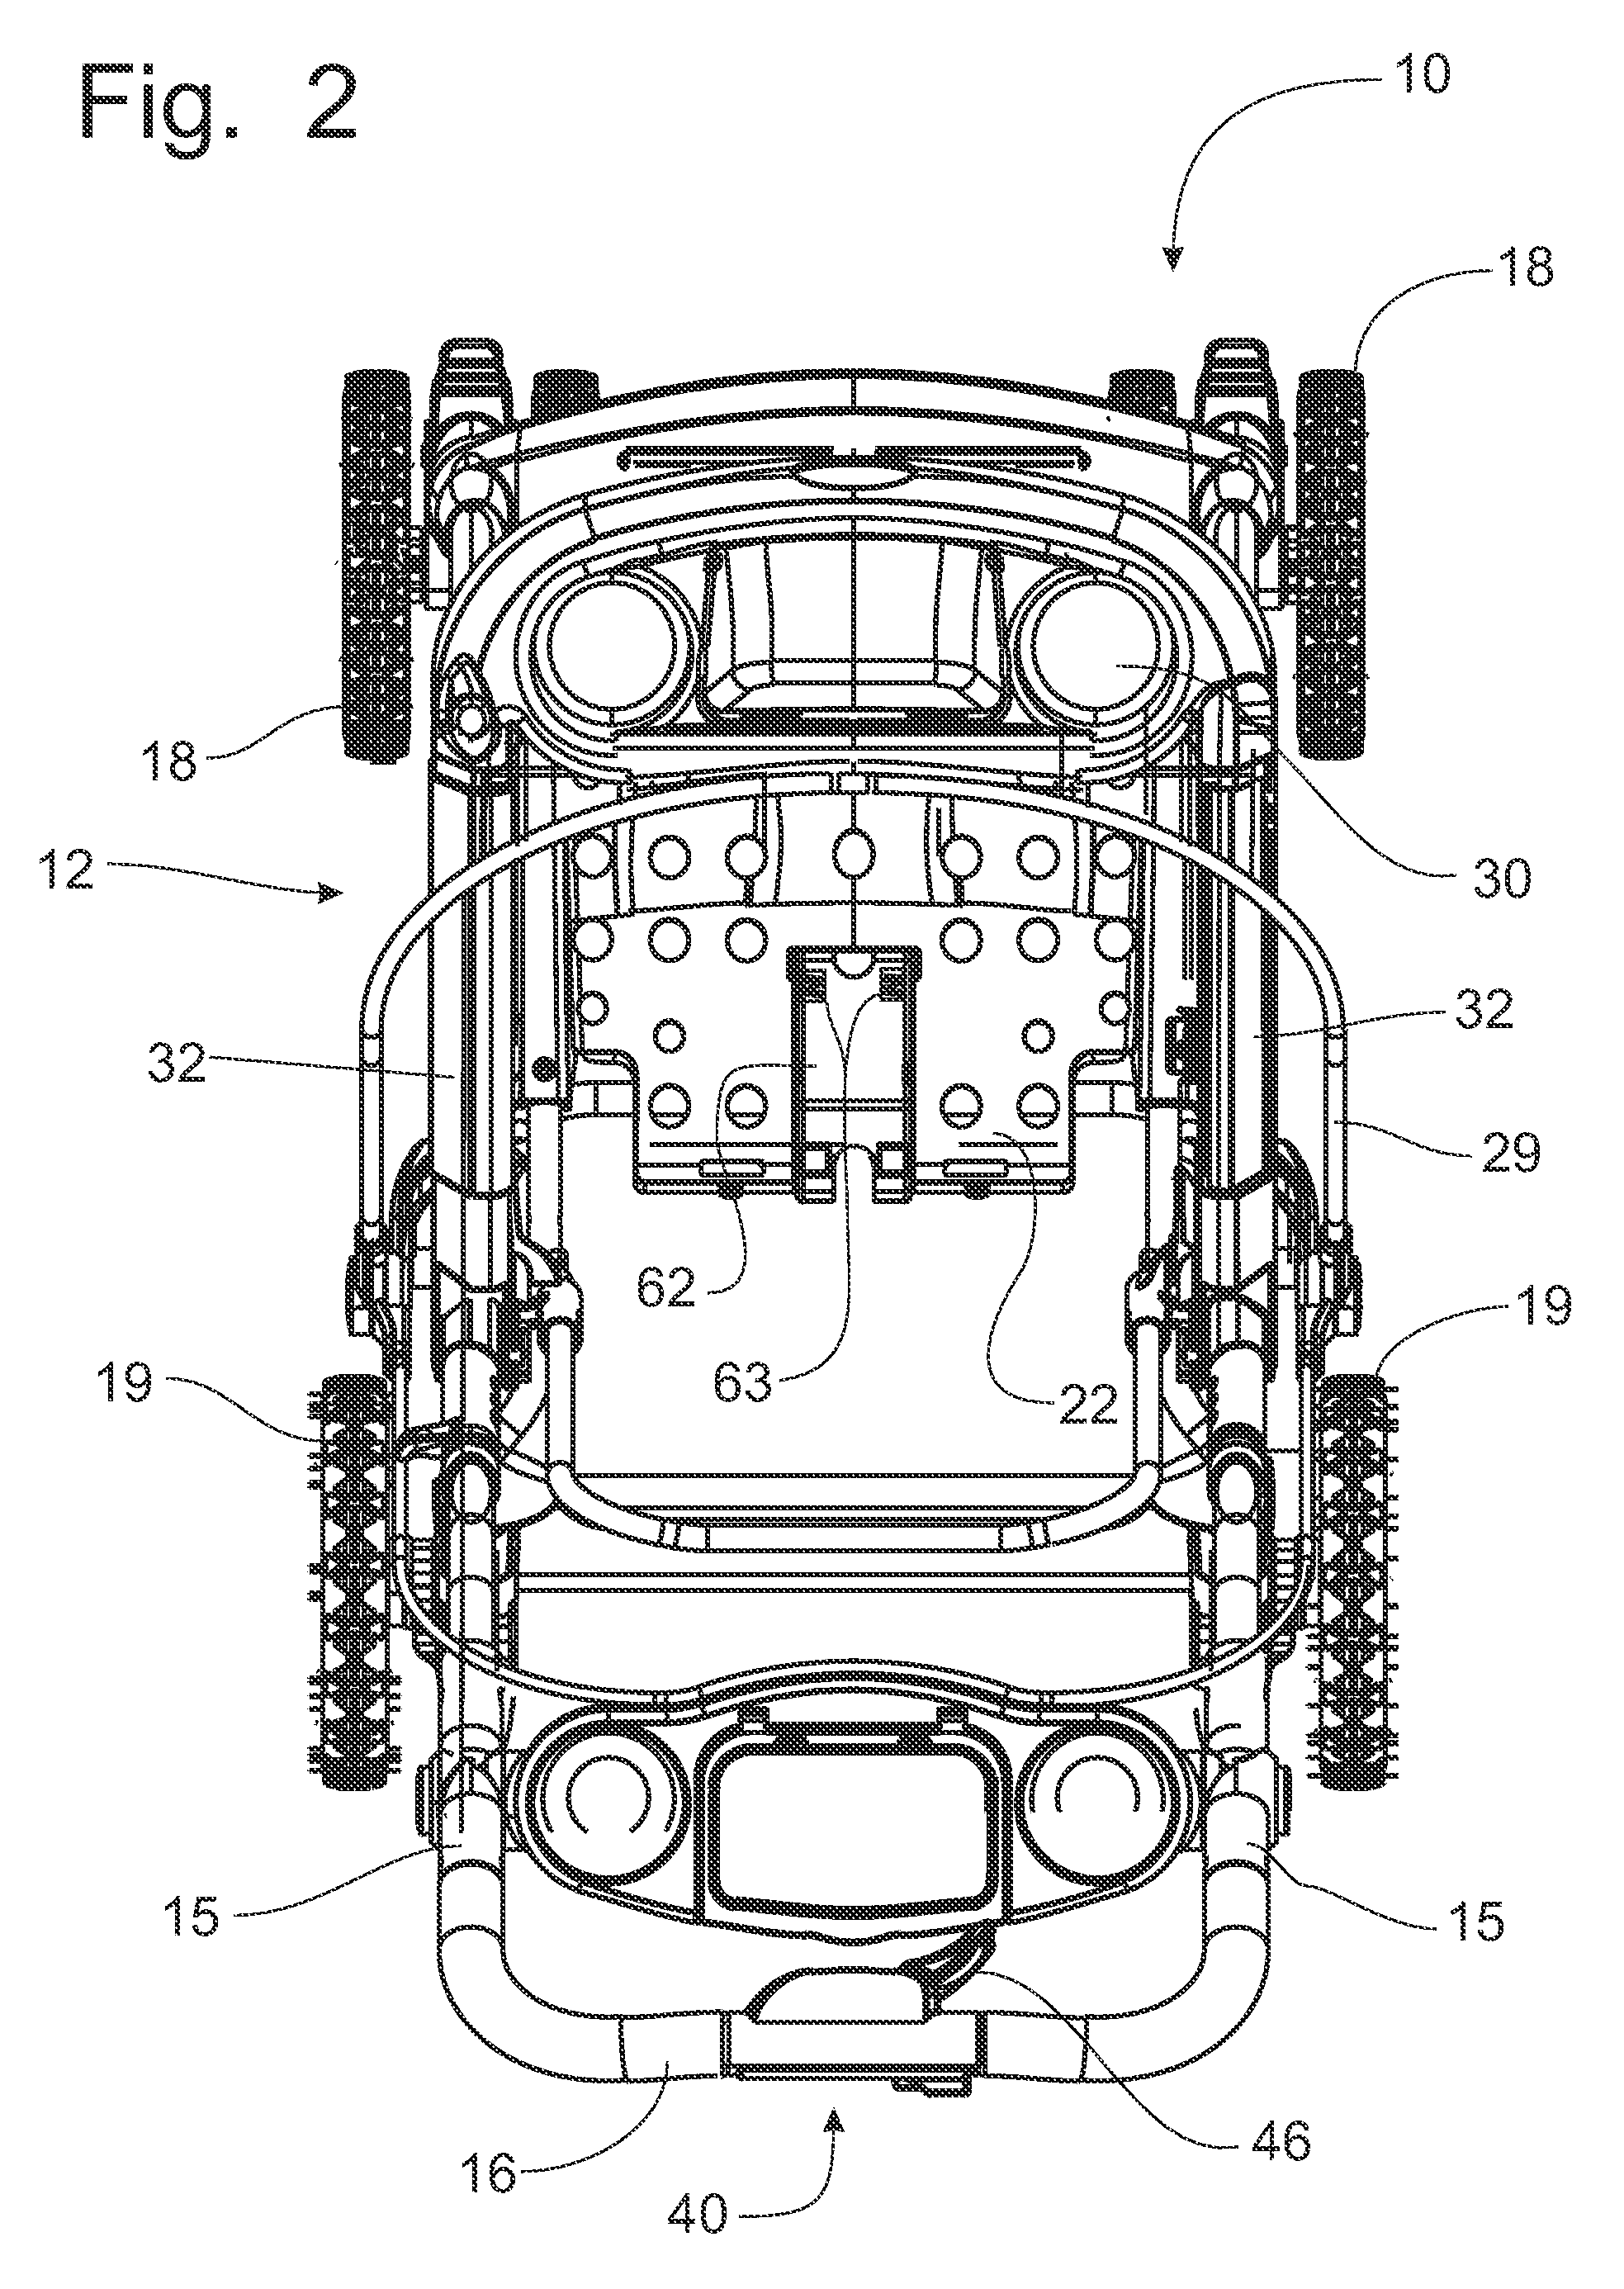 Stroller with spring-assisted fold mechanism